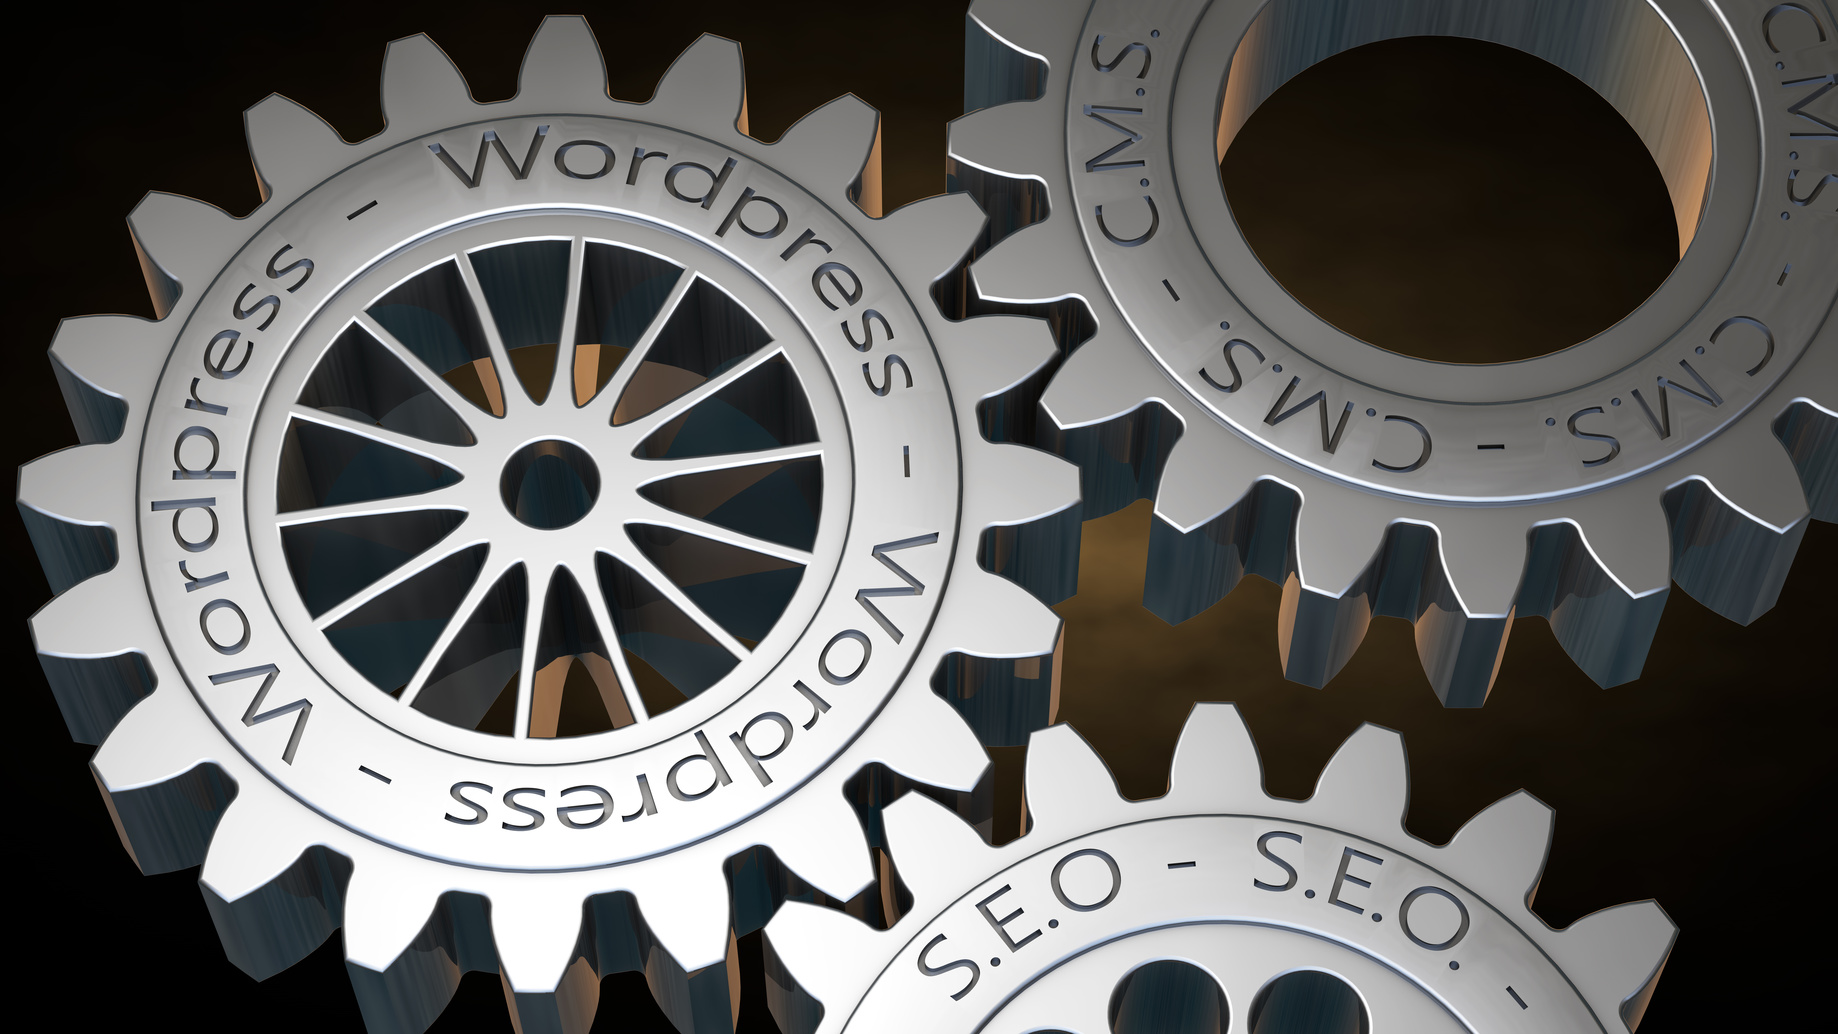 4 WordPress Plugins Every Website Needs to Satisfy Searchers and Search Engine